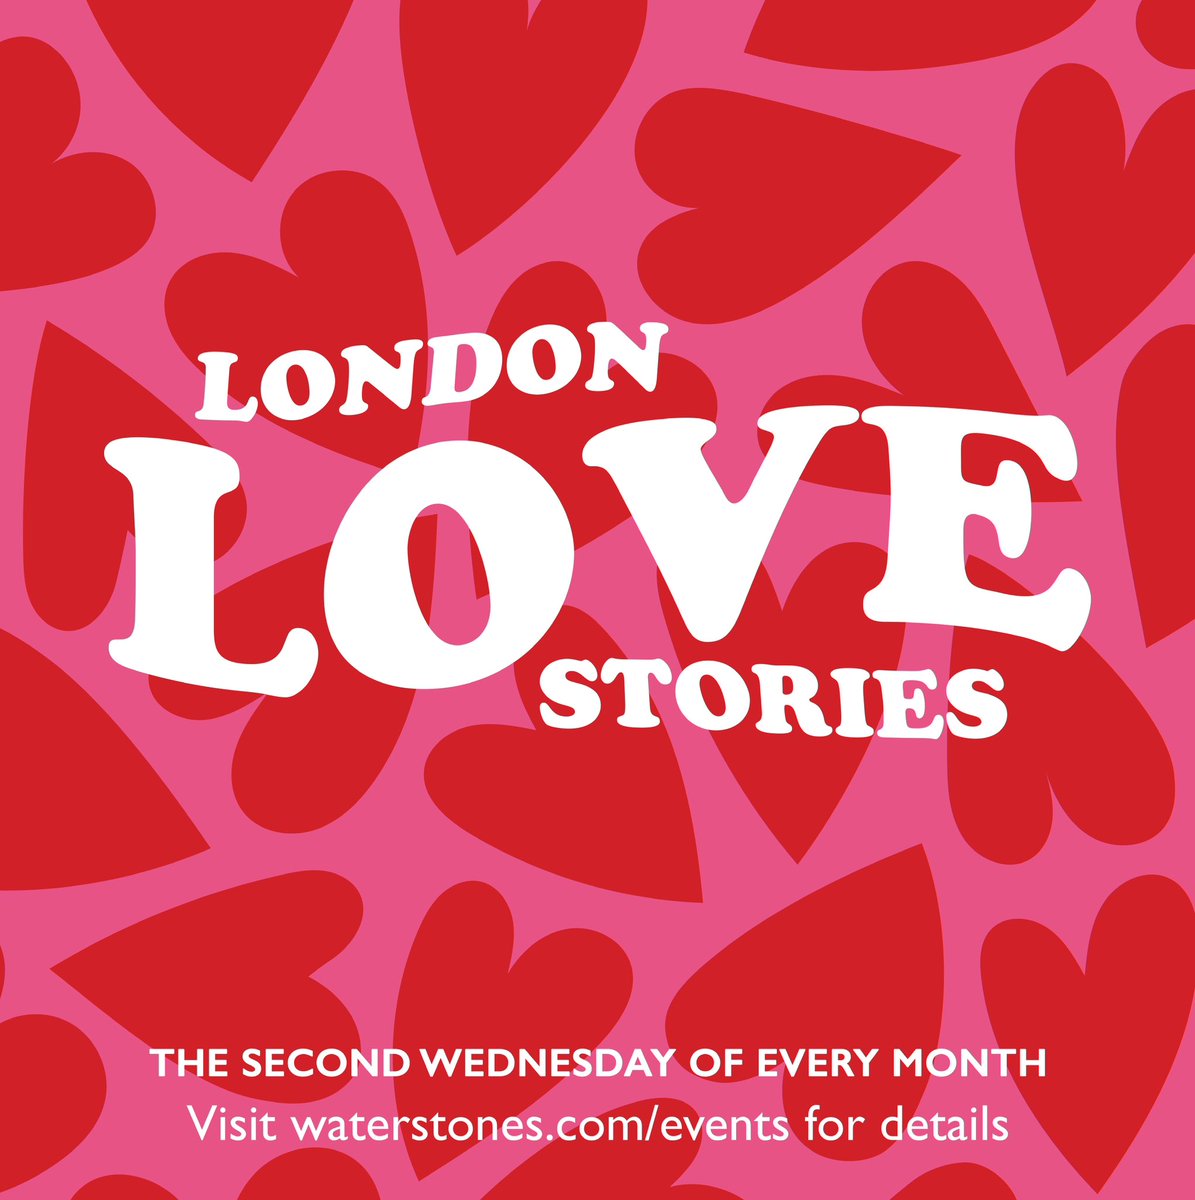 Join us for our second London Love Stories event with Emma Denny and Bethany Rutter in a week’s time for an exciting evening filled with chatting, romance and treats! Tickets➡️♥️ bit.ly/3uBgQ0I